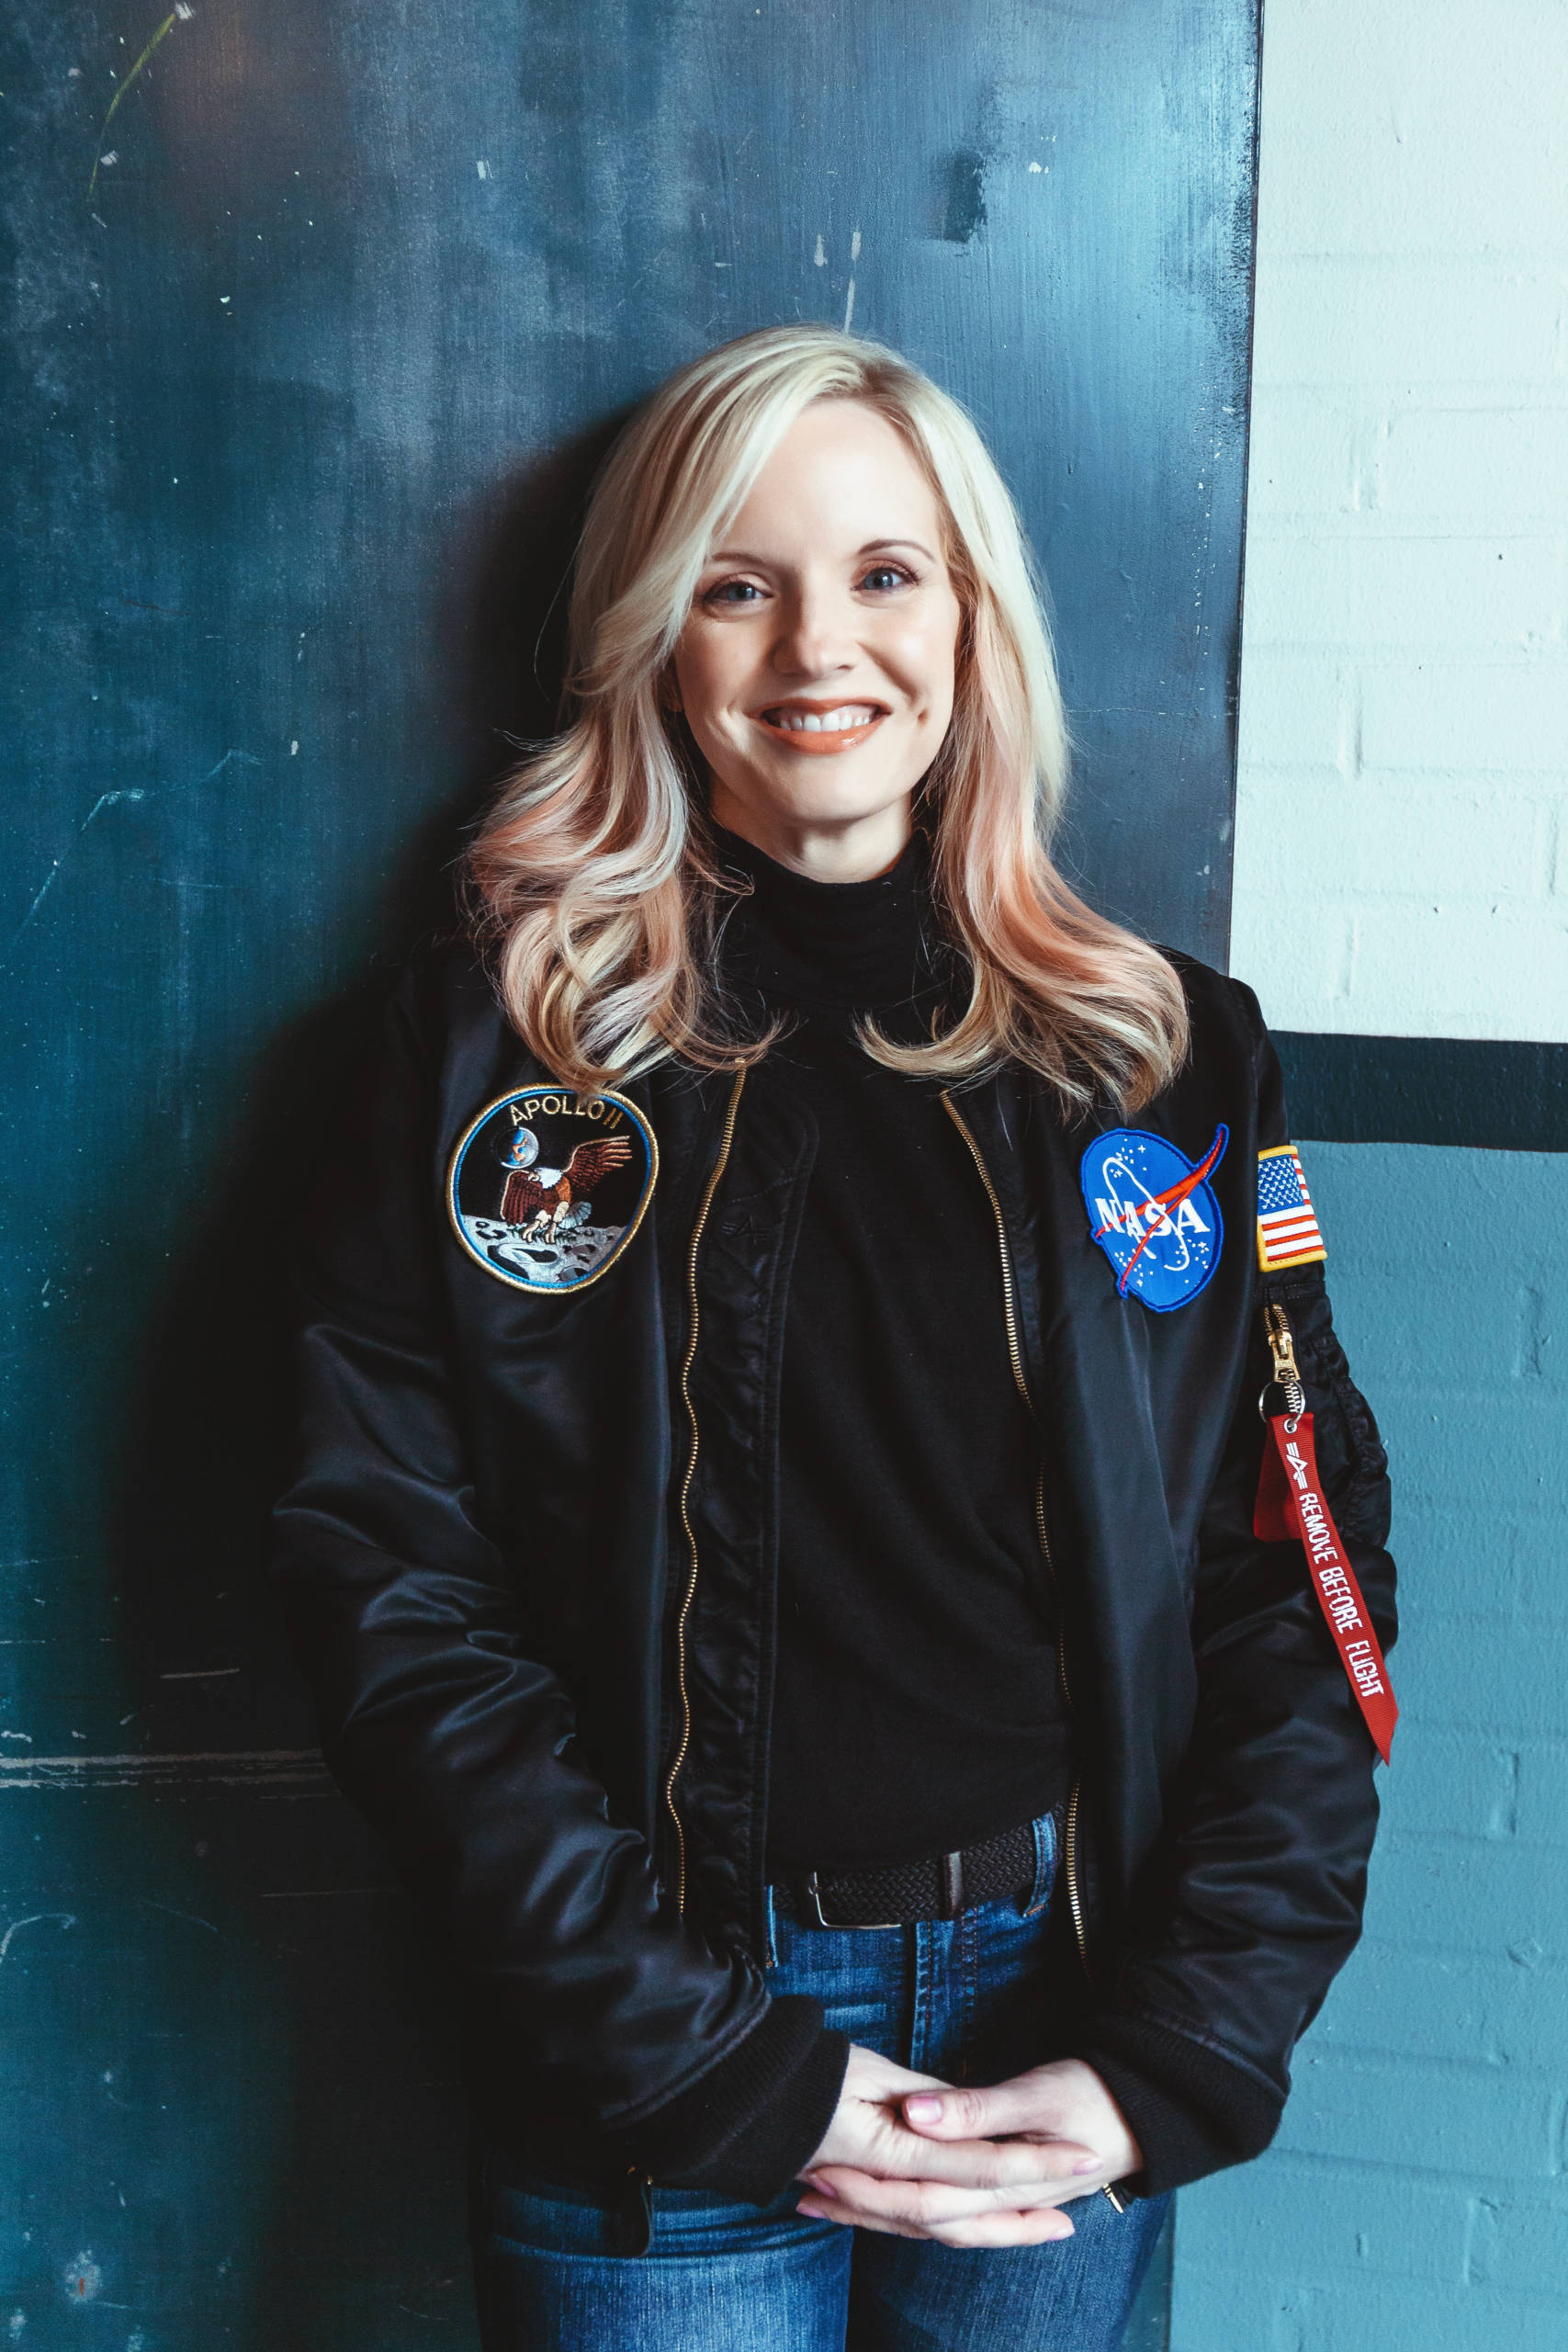 Kim Arcand stands against a wall smiling, wearing a NASA jacket